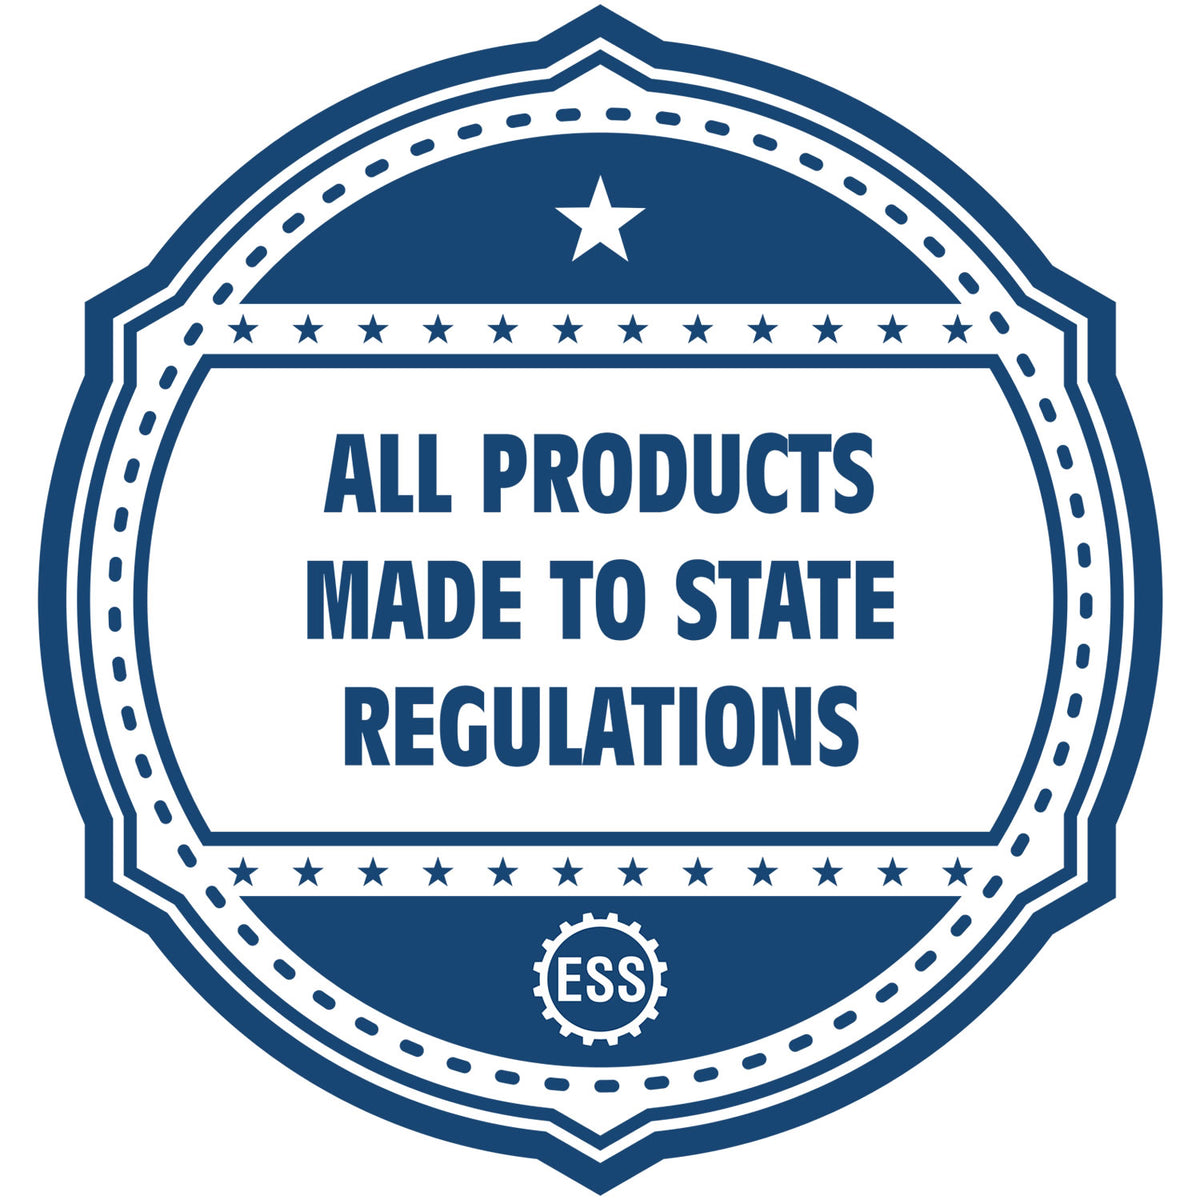 An icon or badge element for the Slim Pre-Inked Rectangular Notary Stamp for Washington showing that this product is made in compliance with state regulations.